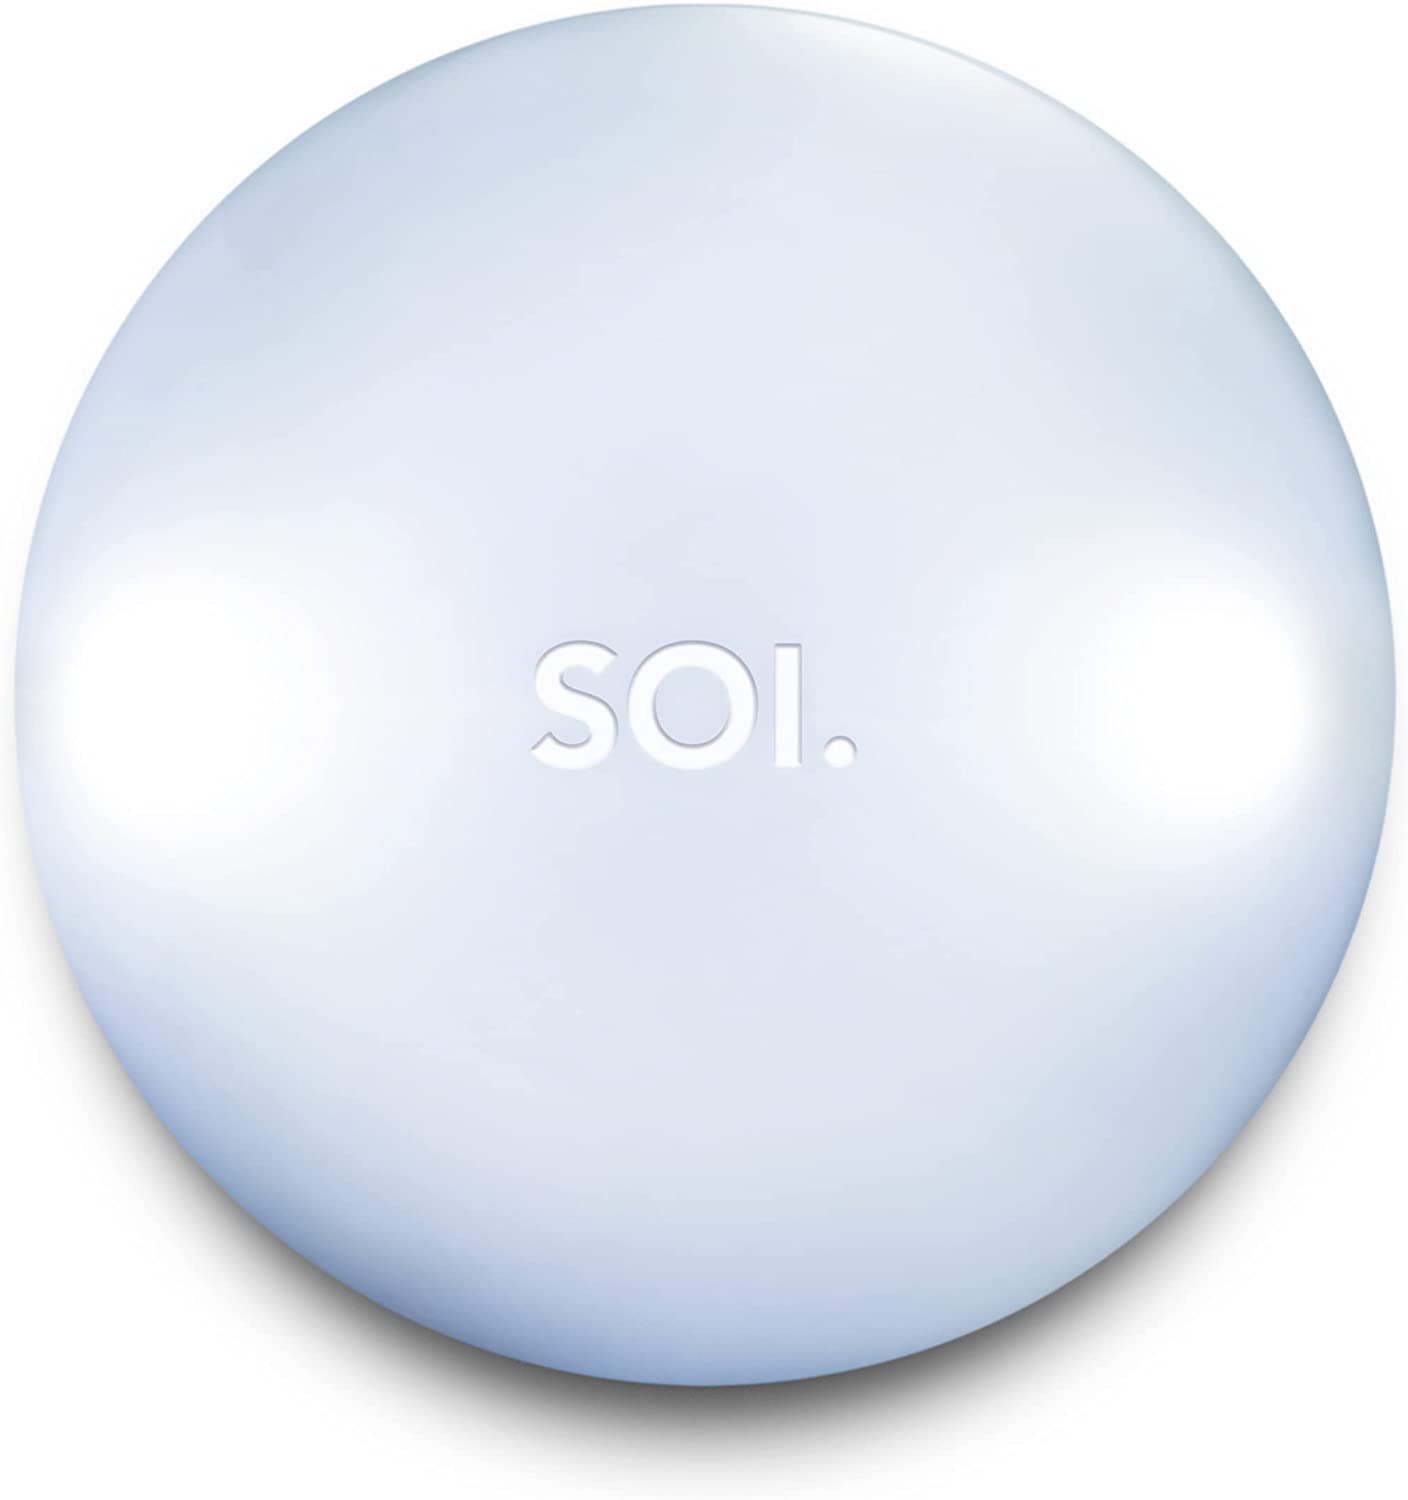 A small round light that can be placed in your carry on bag, handbag or luggage to easily find things. It turns on automatically.